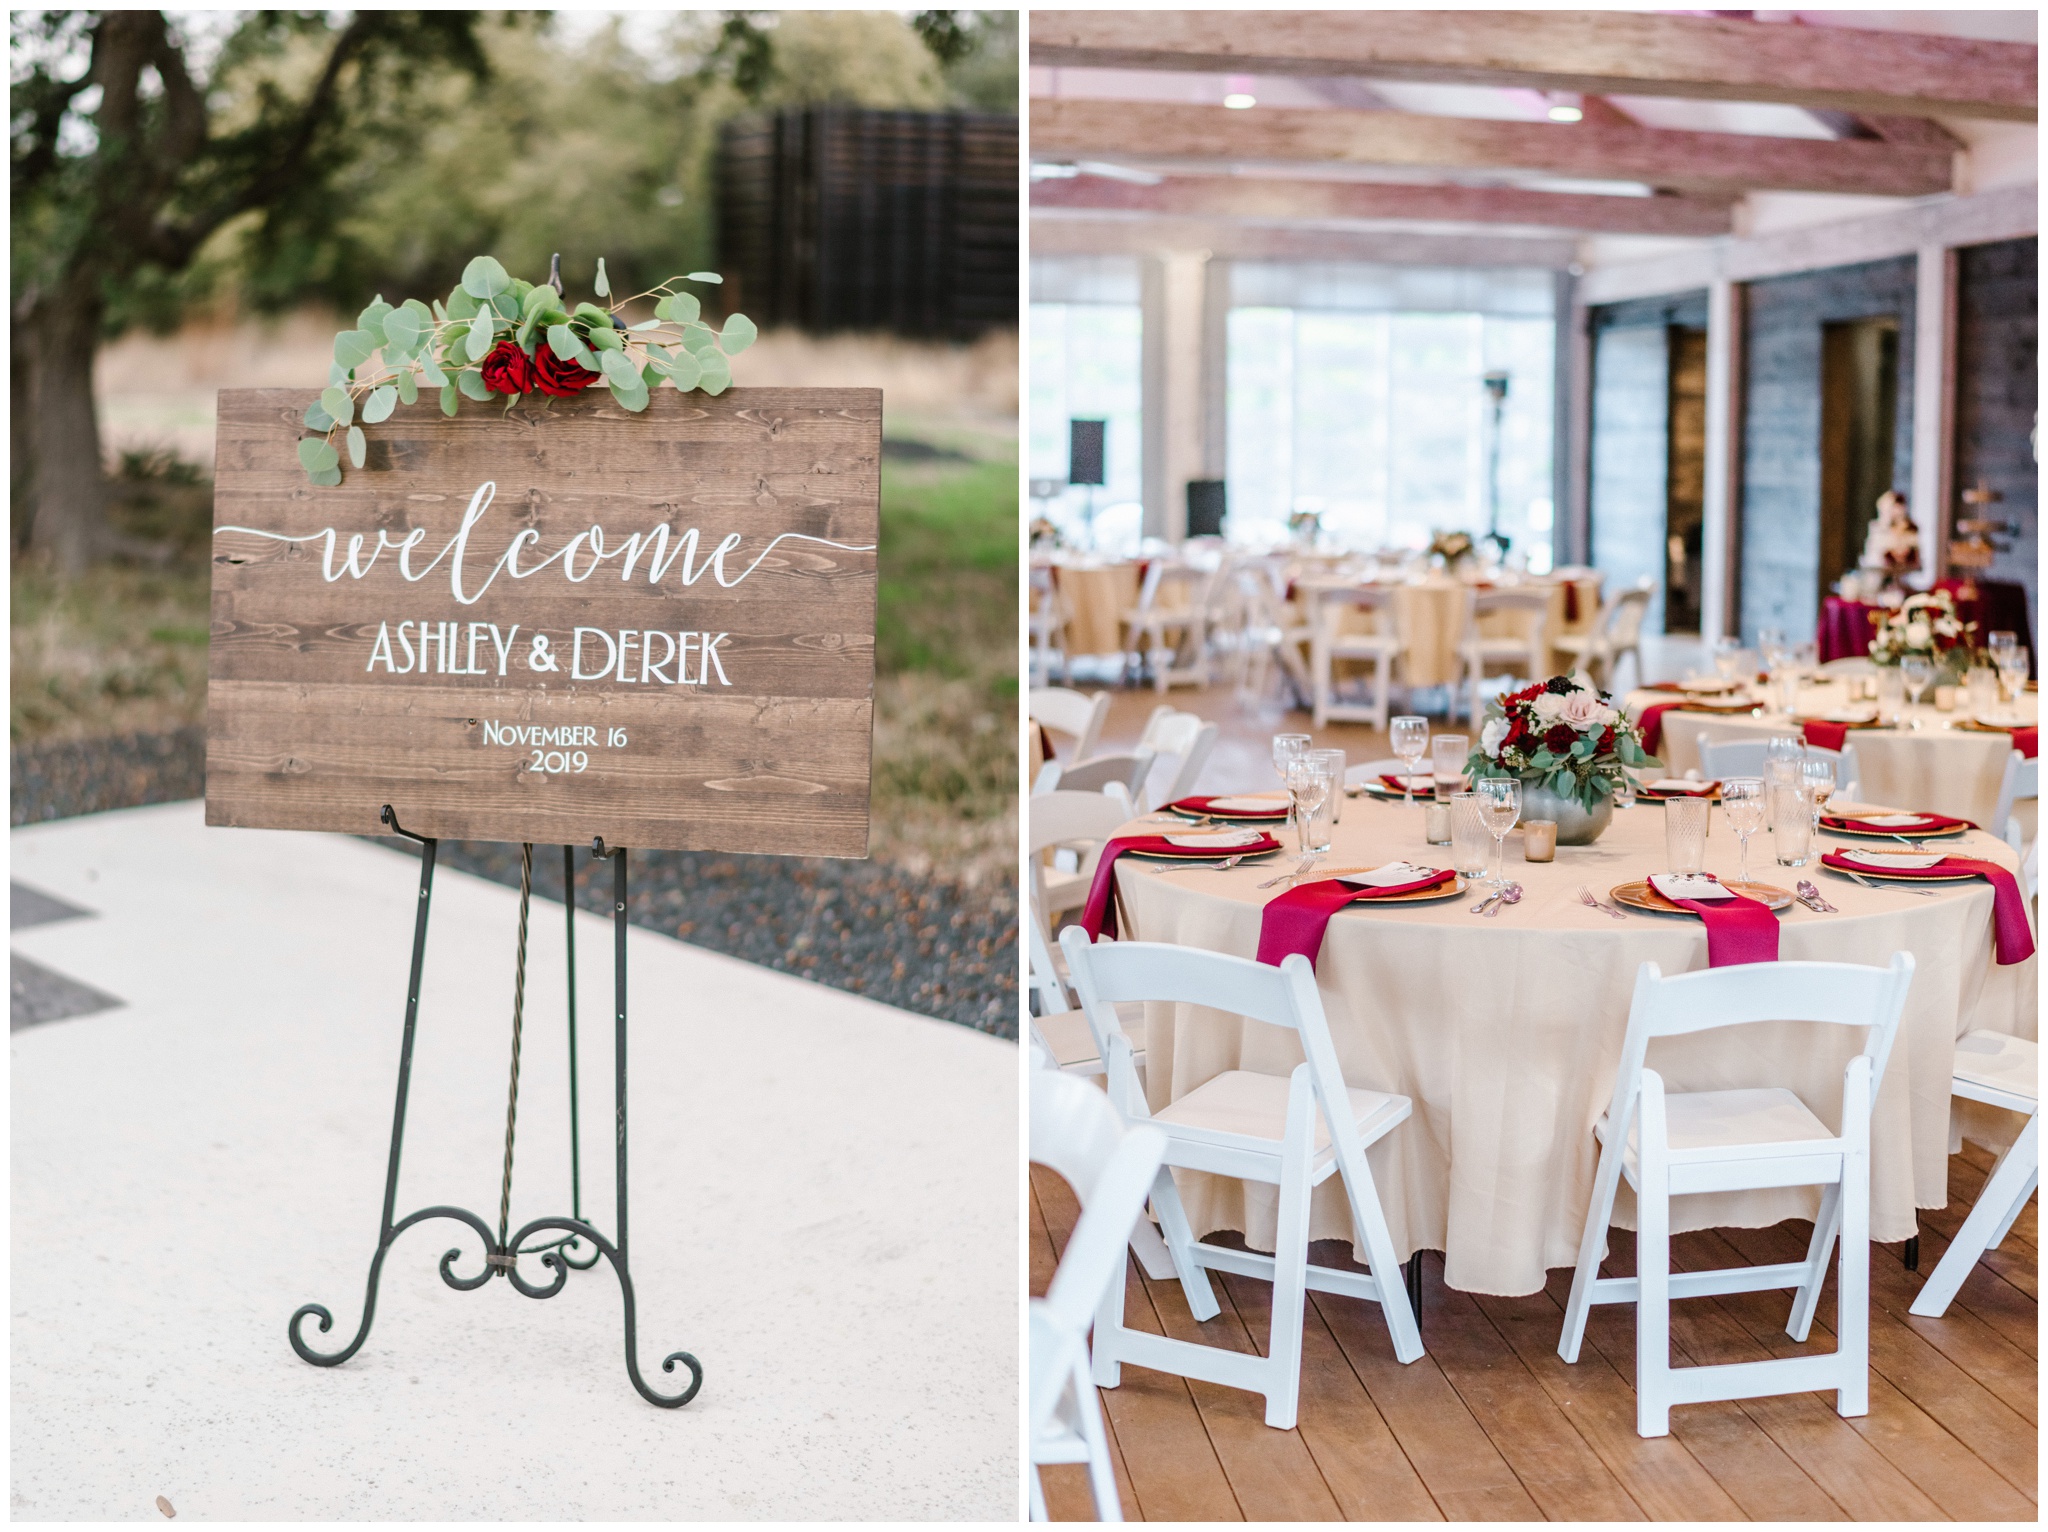 Wooden welcome sign with red roses, Cedars Ranch Venue, Austin TX